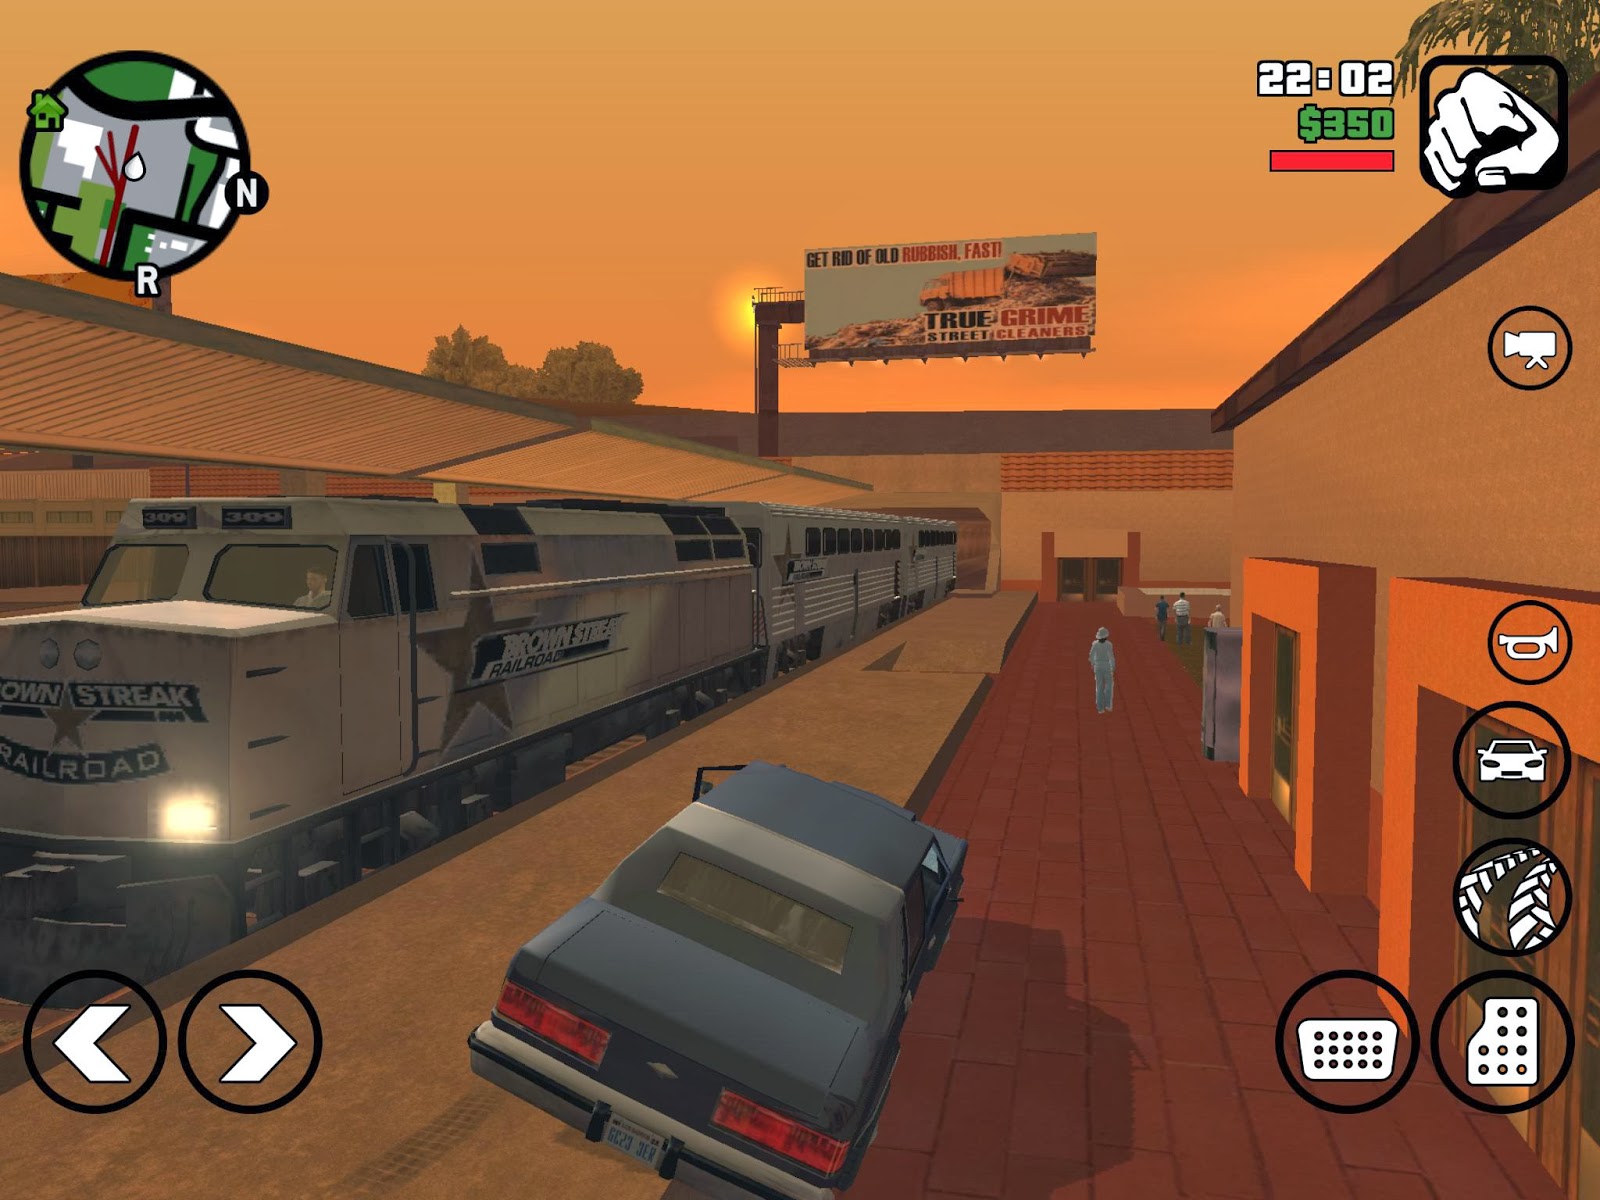 GTA San Andreas for Android APK + Data